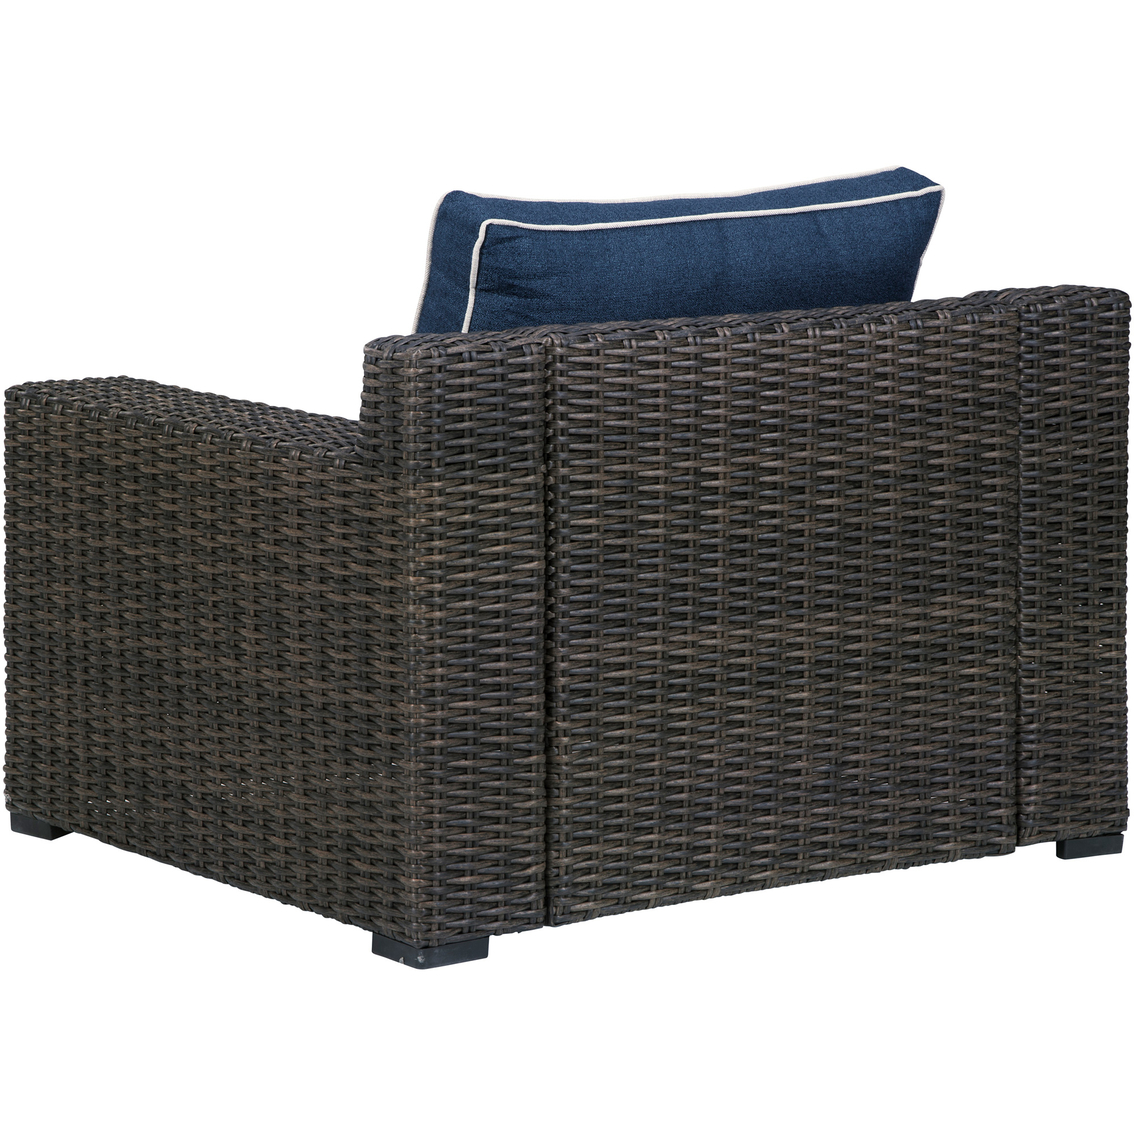 Signature Design by Ashley Grasson Lane Outdoor Lounge Chair with Cushions - Image 2 of 3